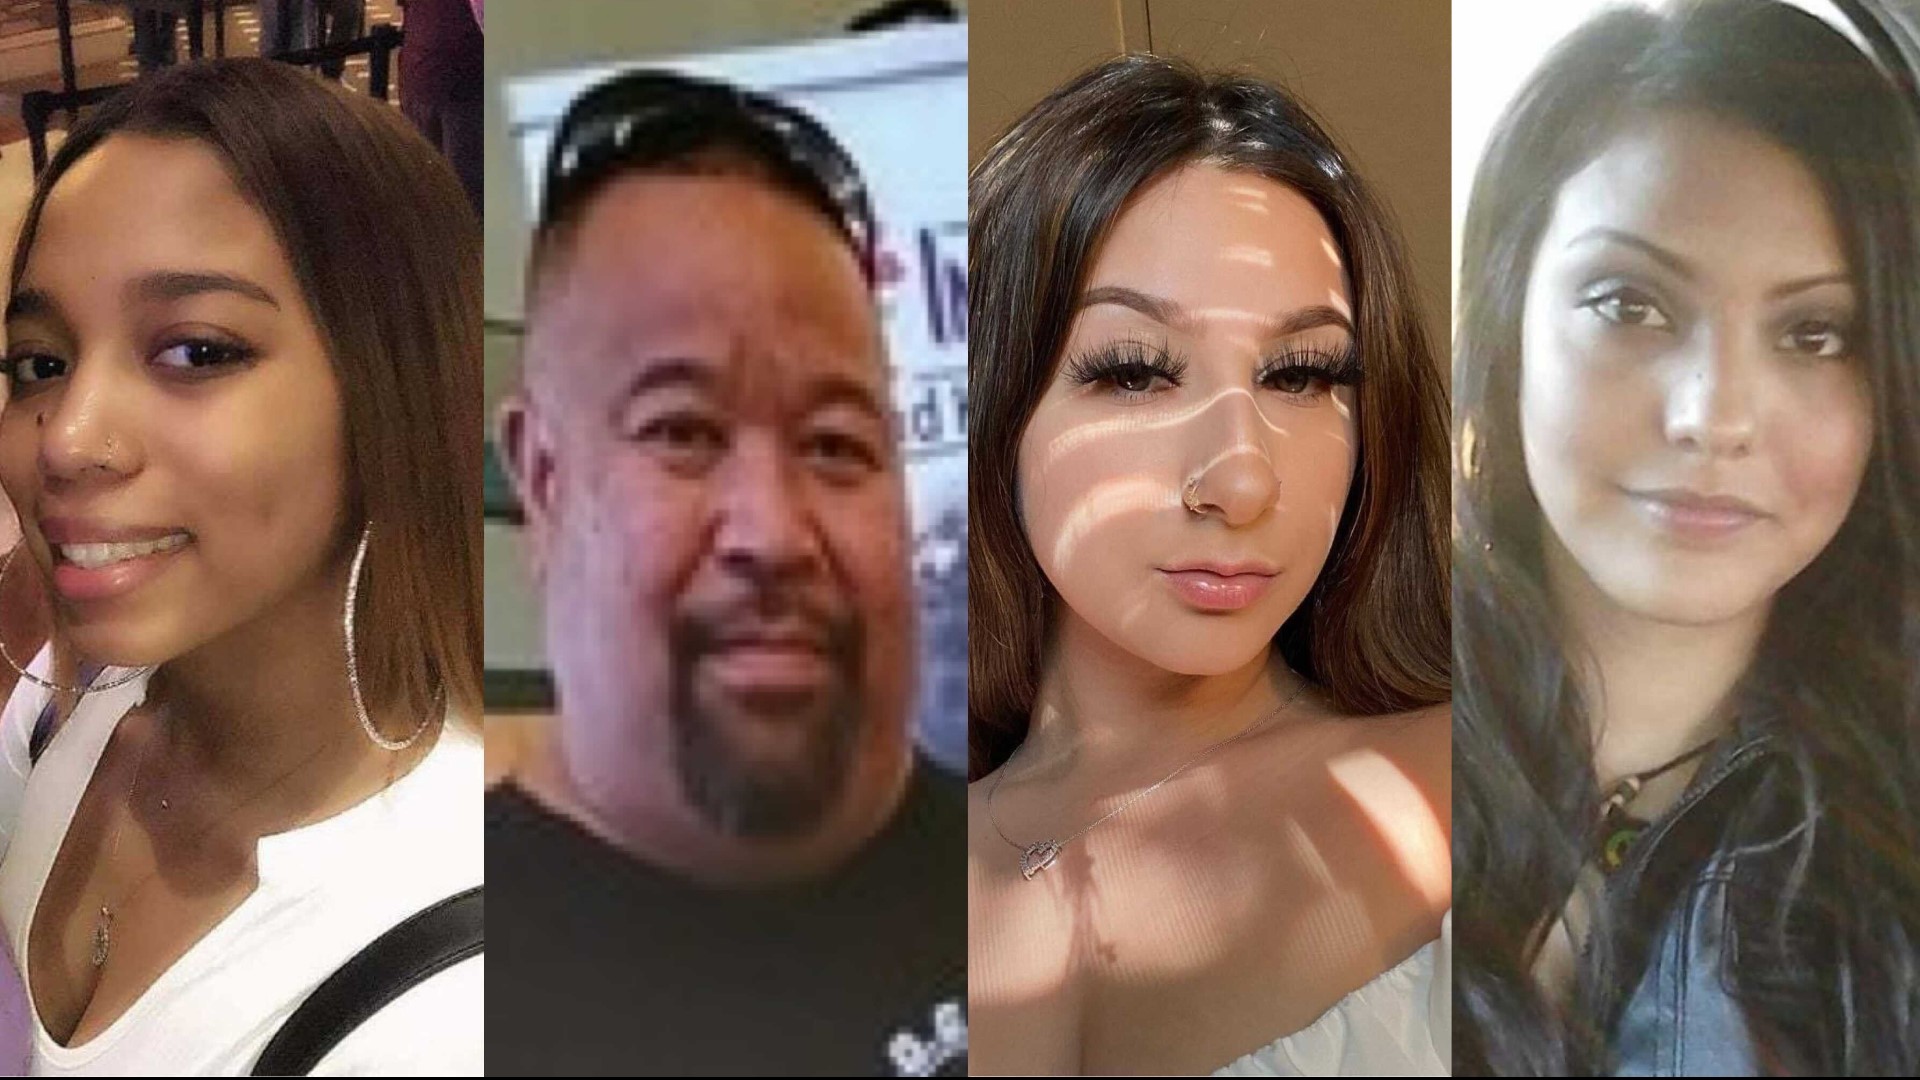 The families of Saraya Redmond, Rodney Hu, Leilani Beauchamp, and Michelle Benavidez are a group of Sacramento-area families bonded by tragedy.